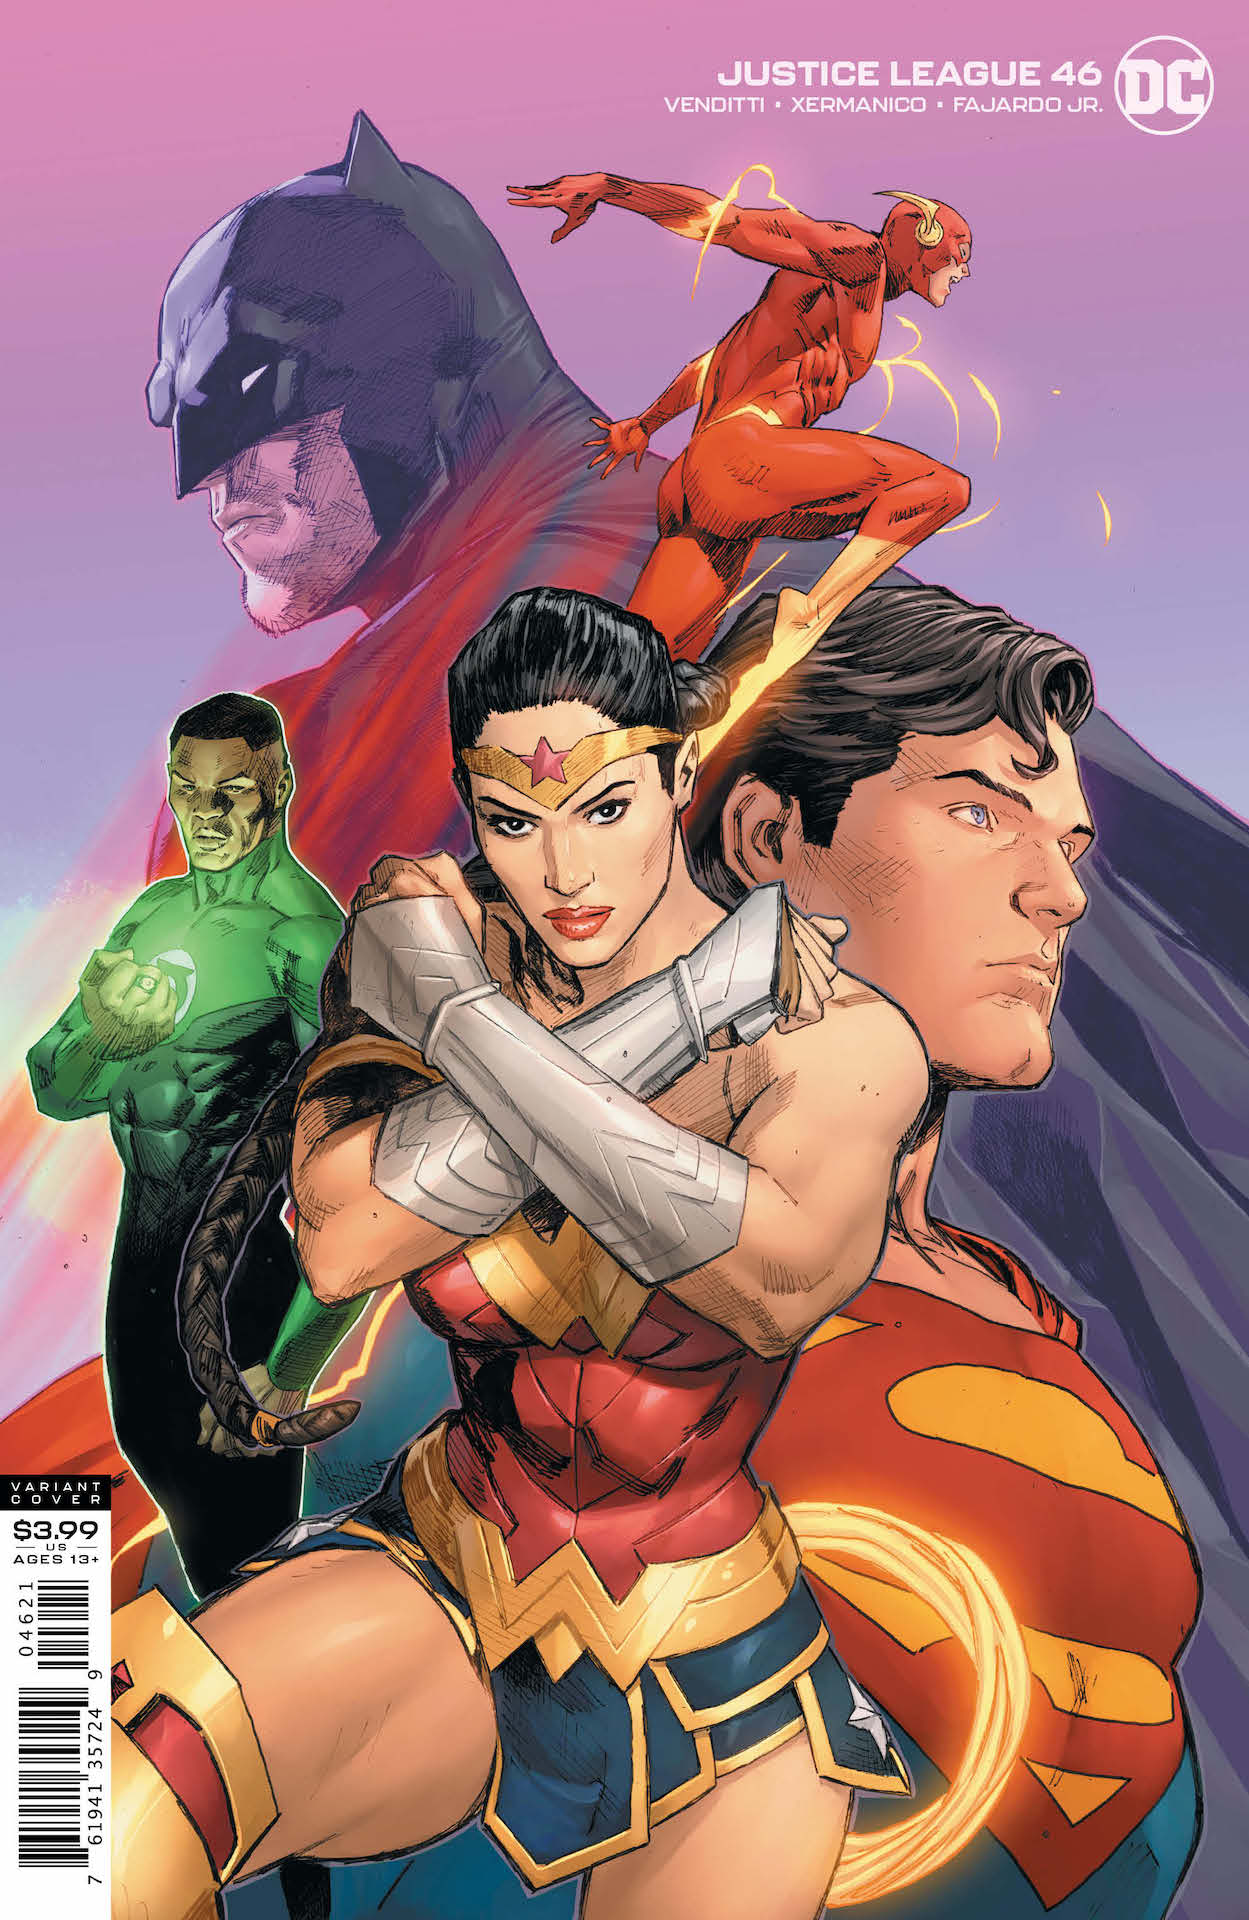 DC Preview: Justice League #46 - Peace hangs in the balance!